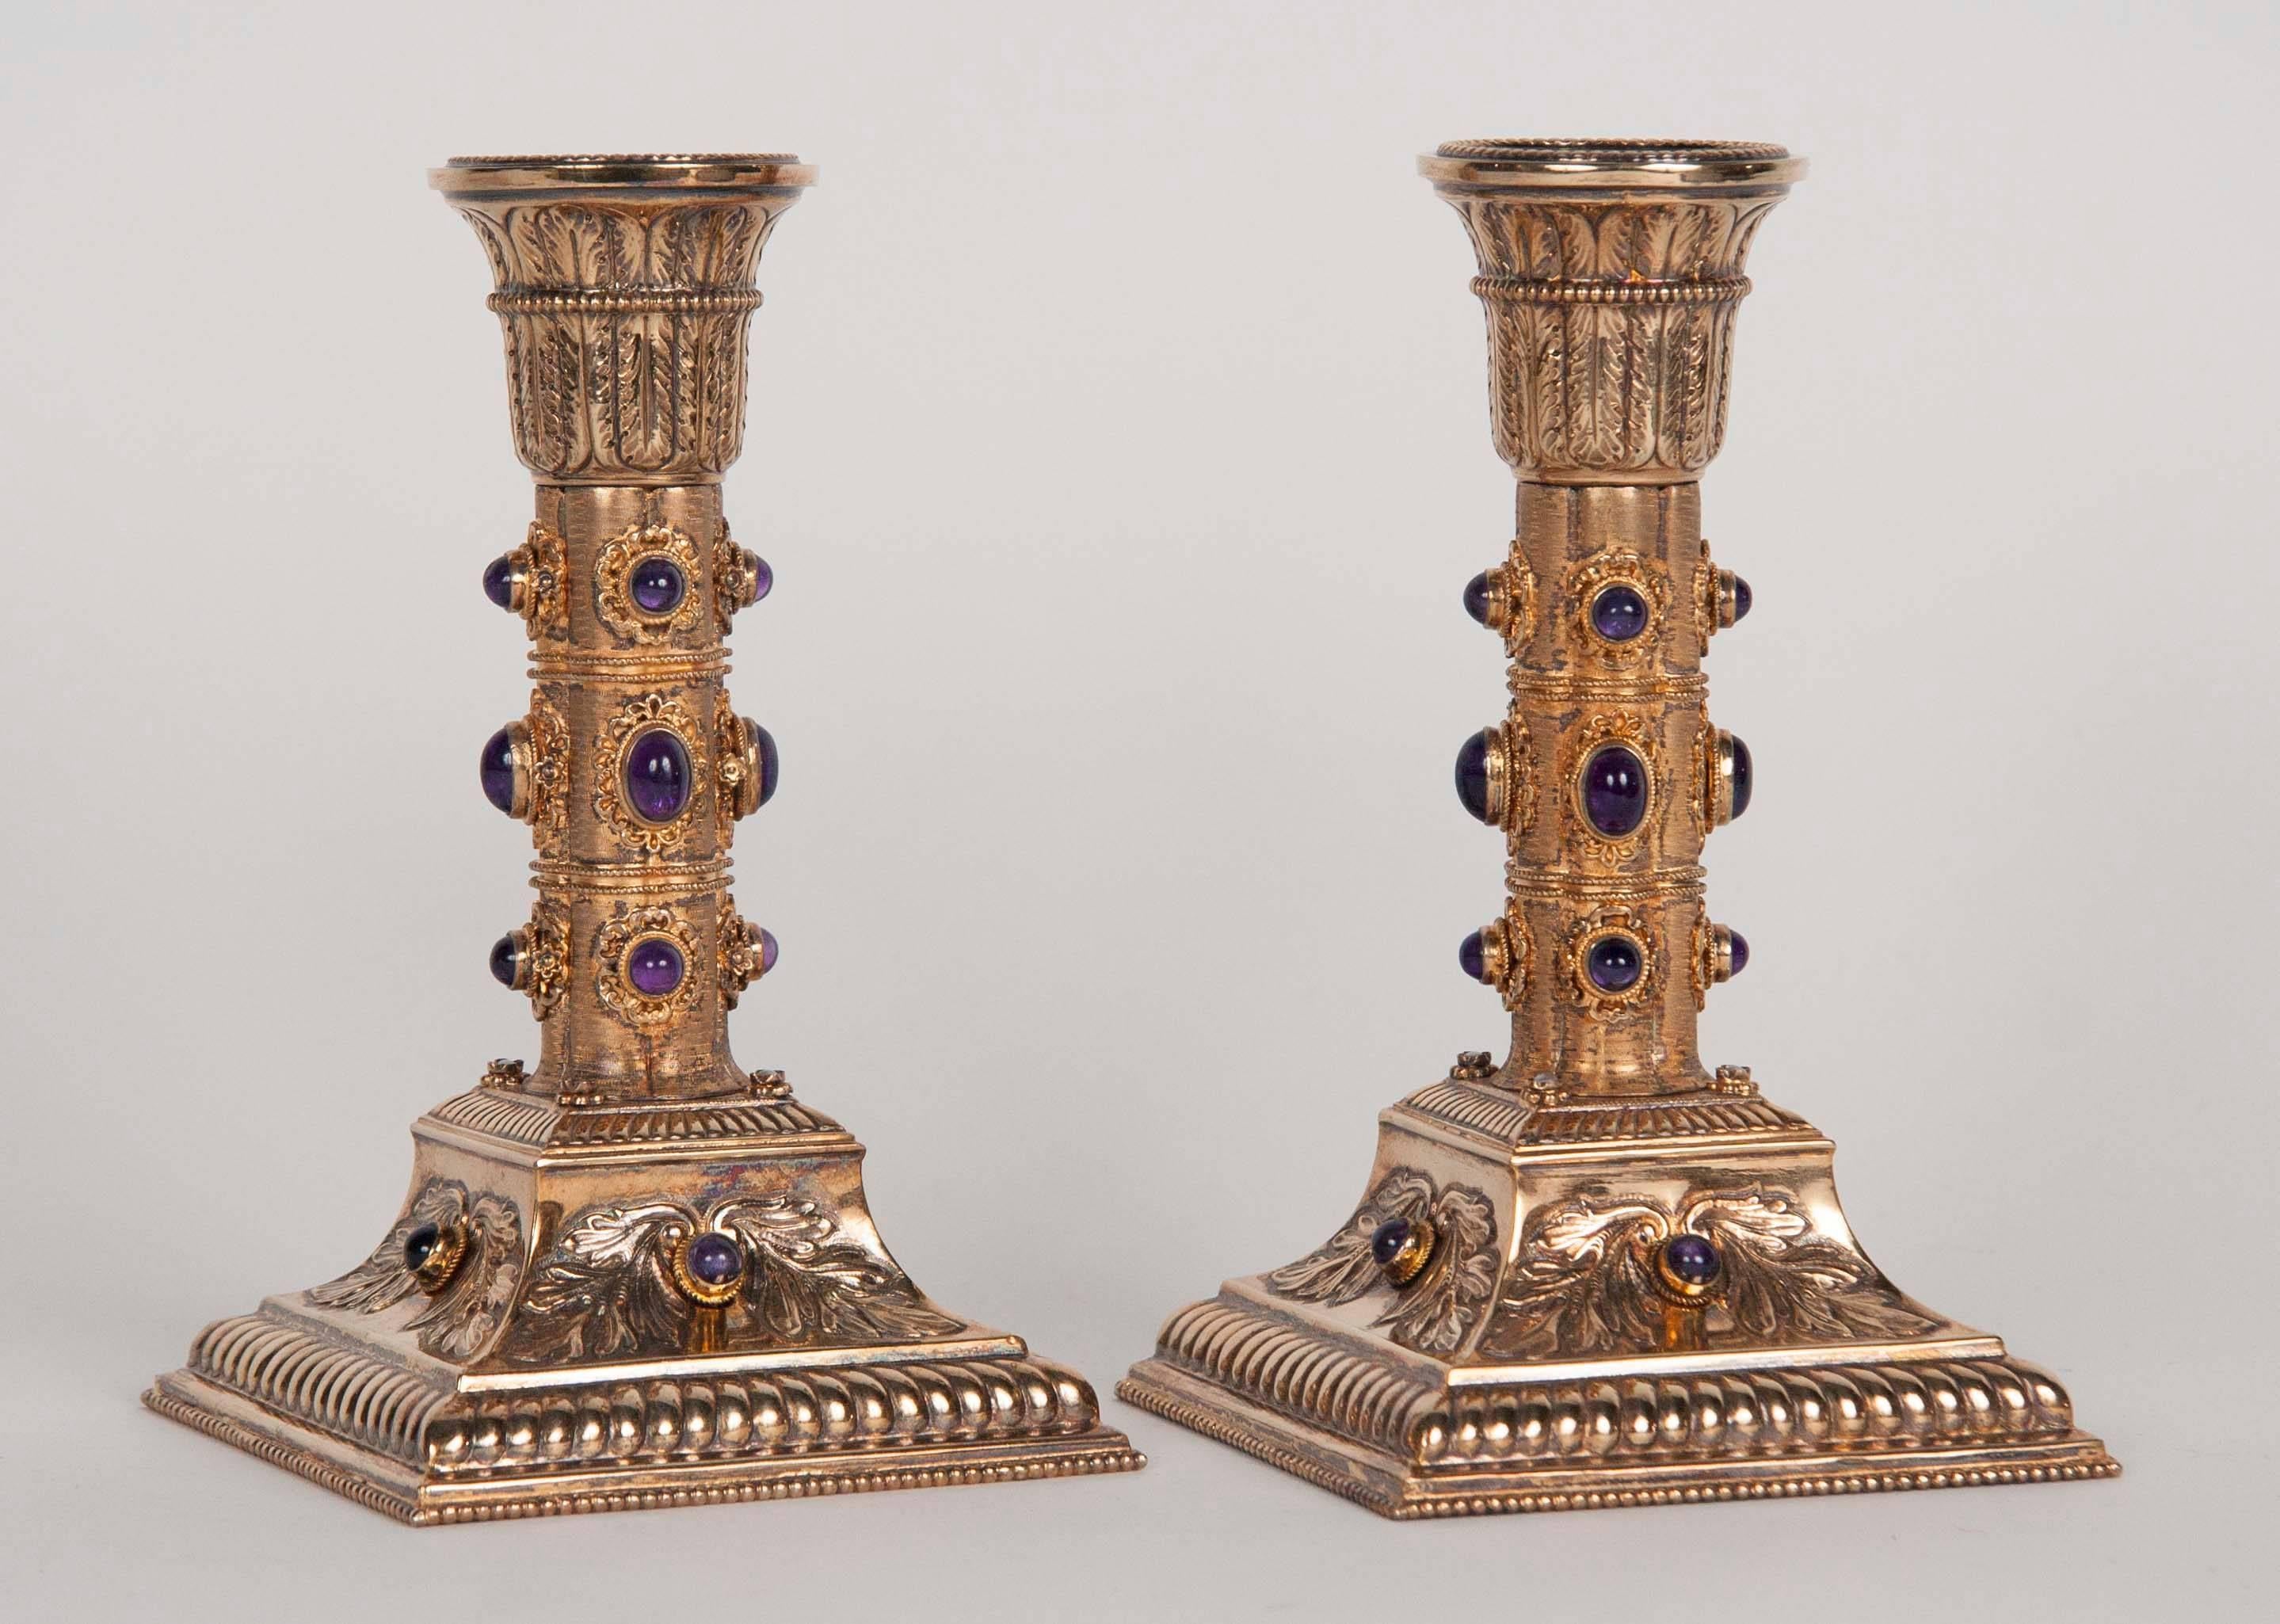 A stunning pair of gilt silver Viennese candlesticks with amethyst cabochons and inset pearls.